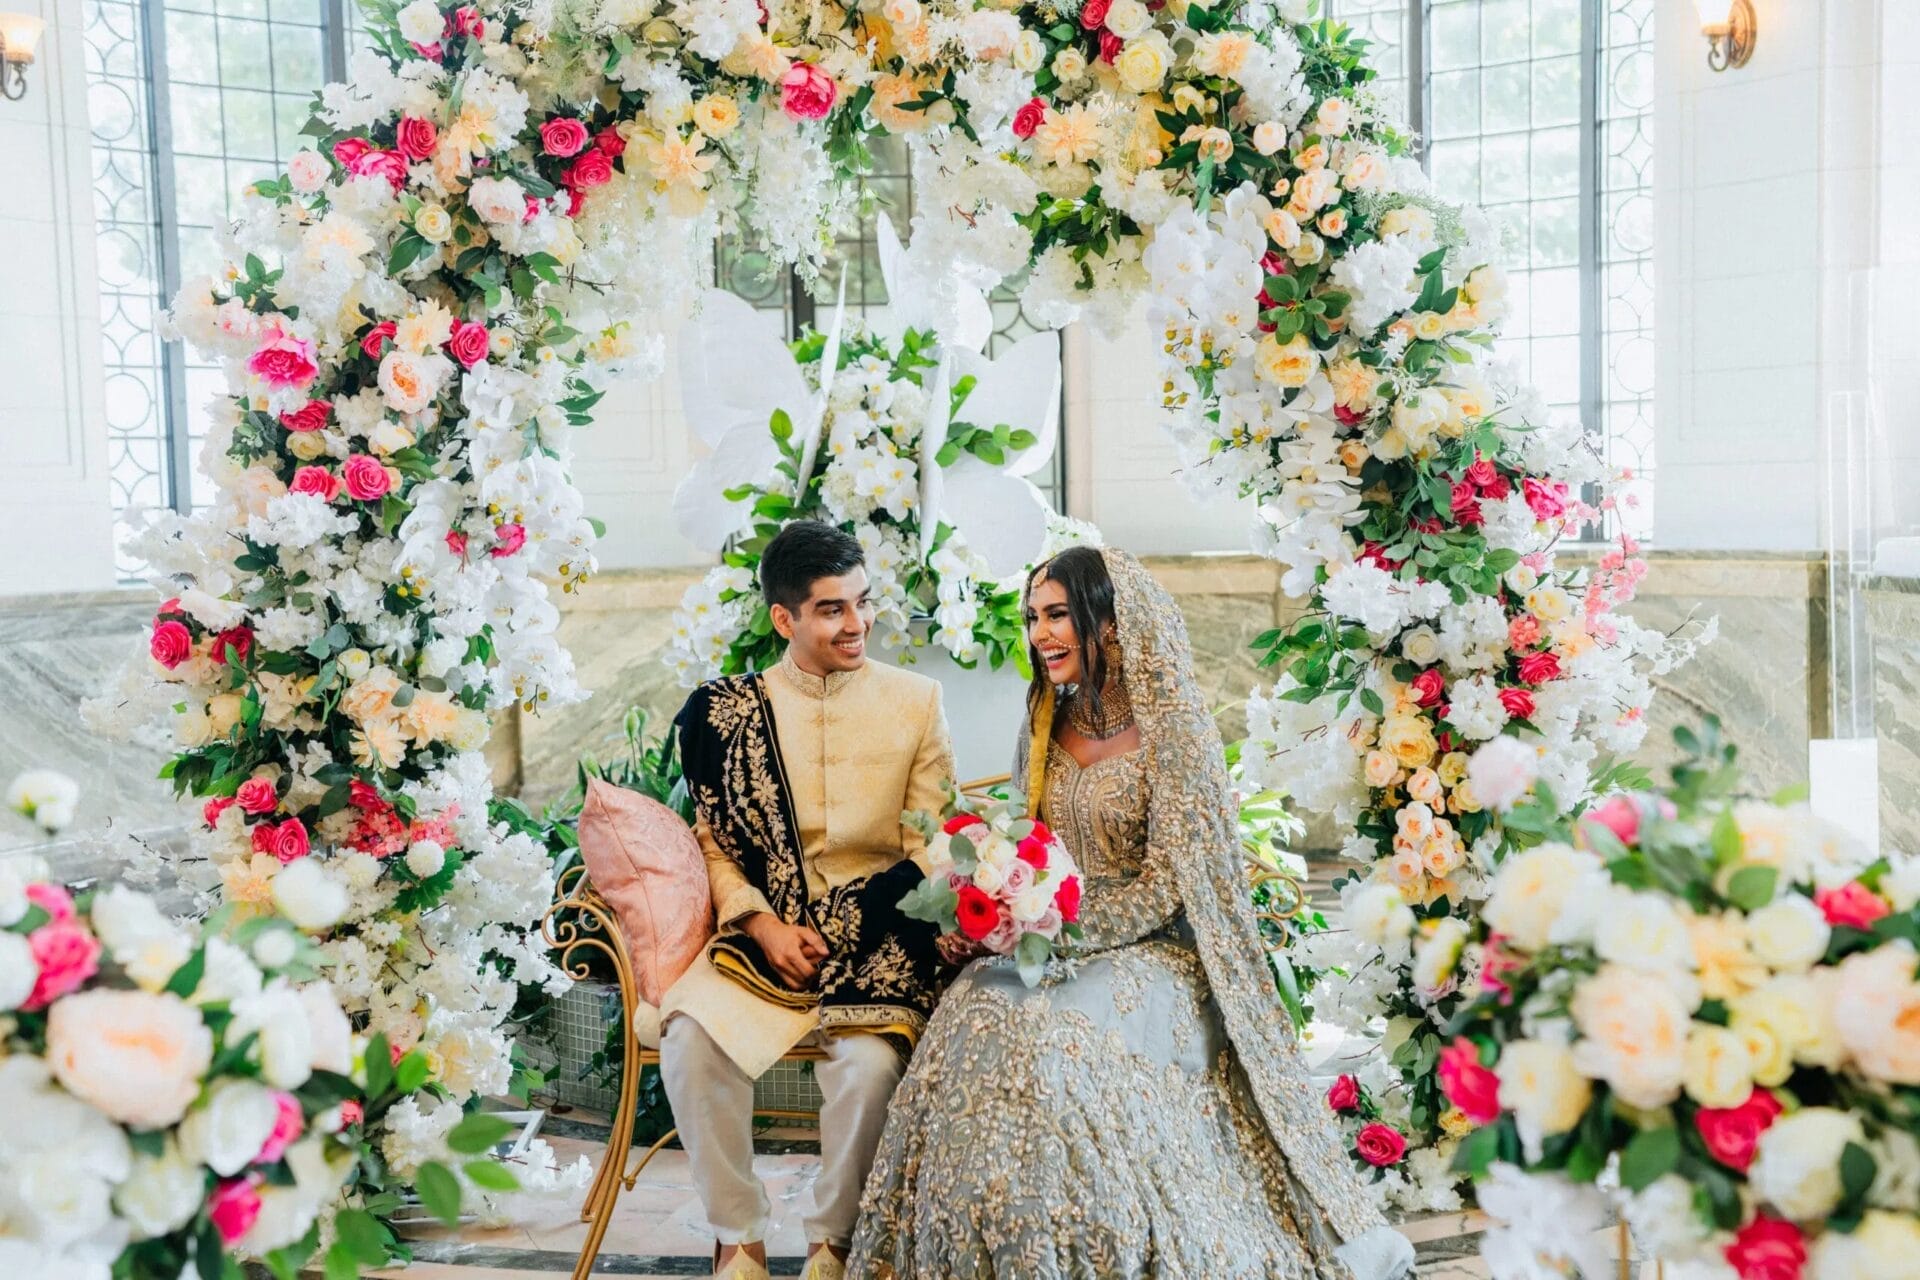 Wedding Planners for South Asian Weddings